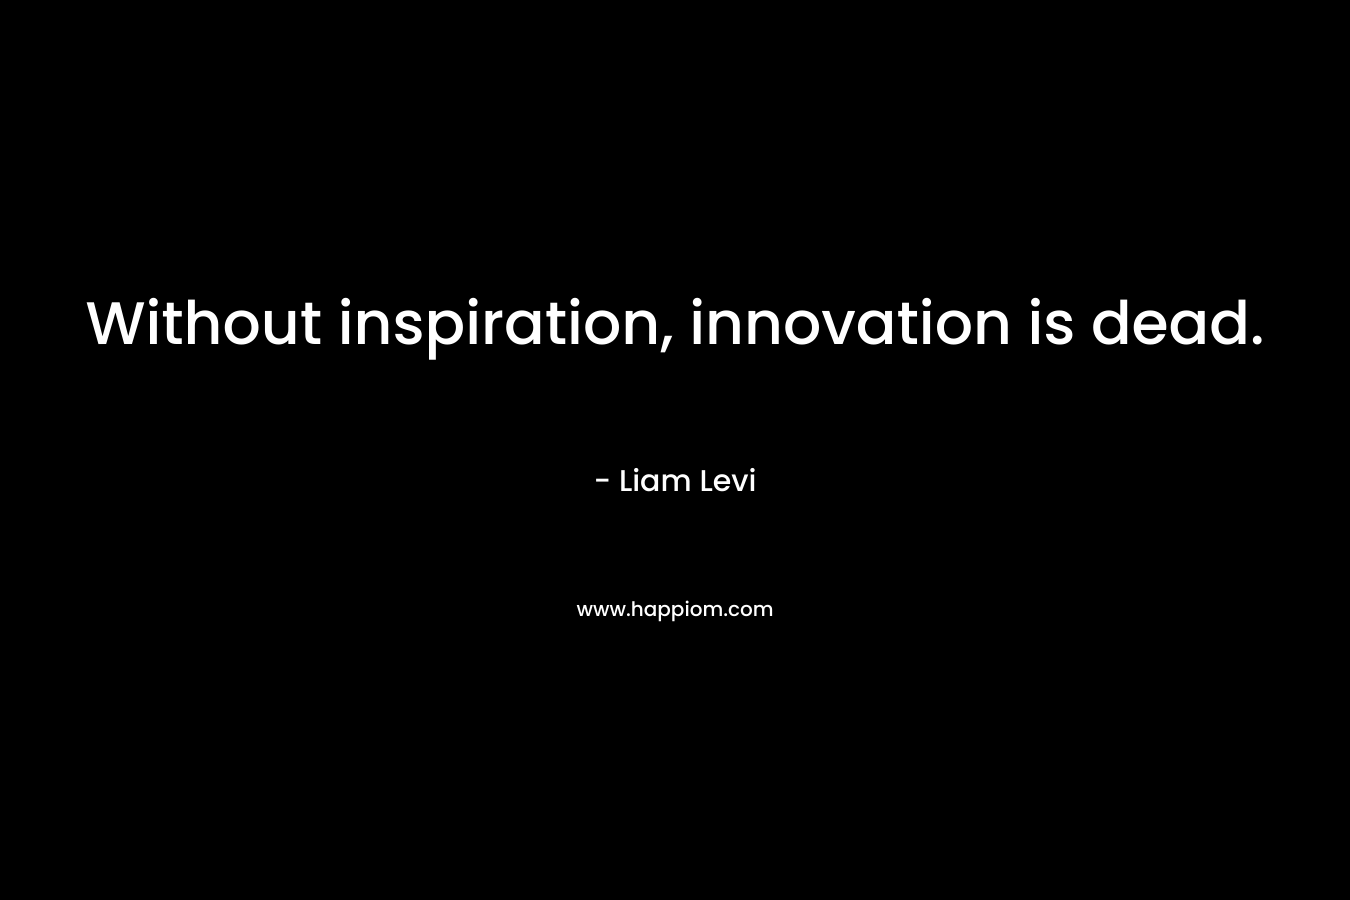 Without inspiration, innovation is dead.